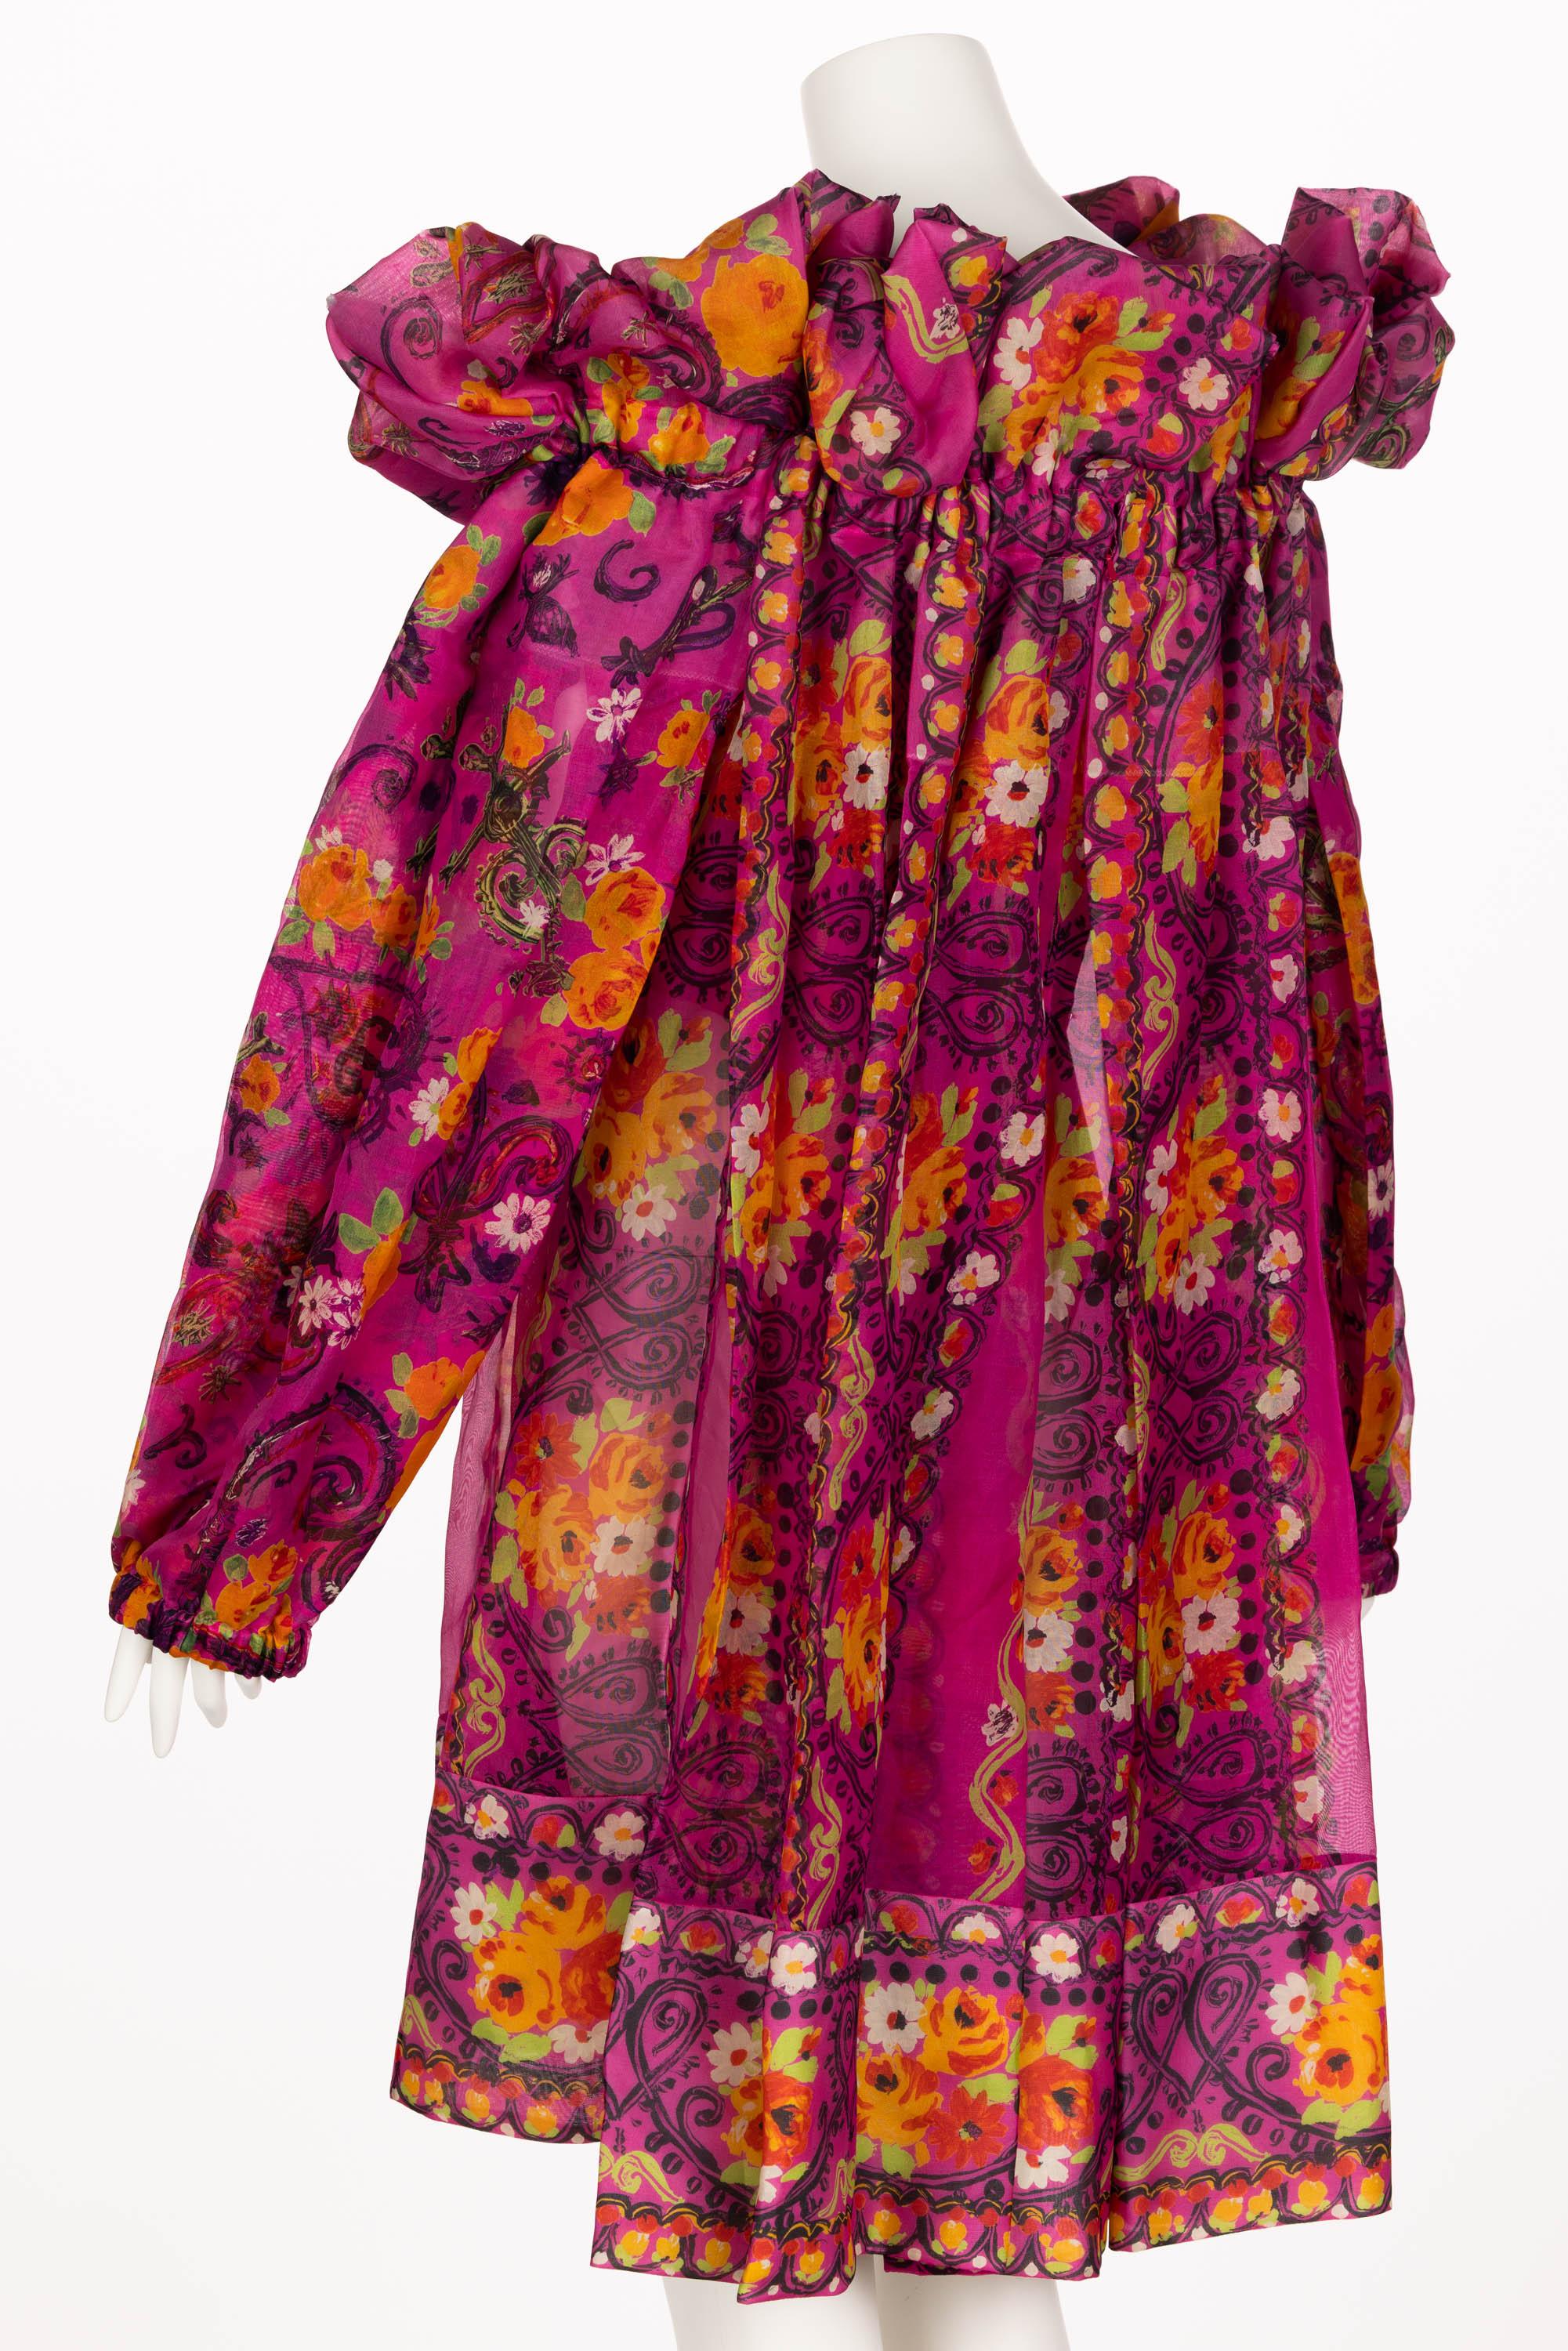 Christian Lacroix Pink Print Silk Ruffle Dress S/S 1992 In Excellent Condition For Sale In Boca Raton, FL